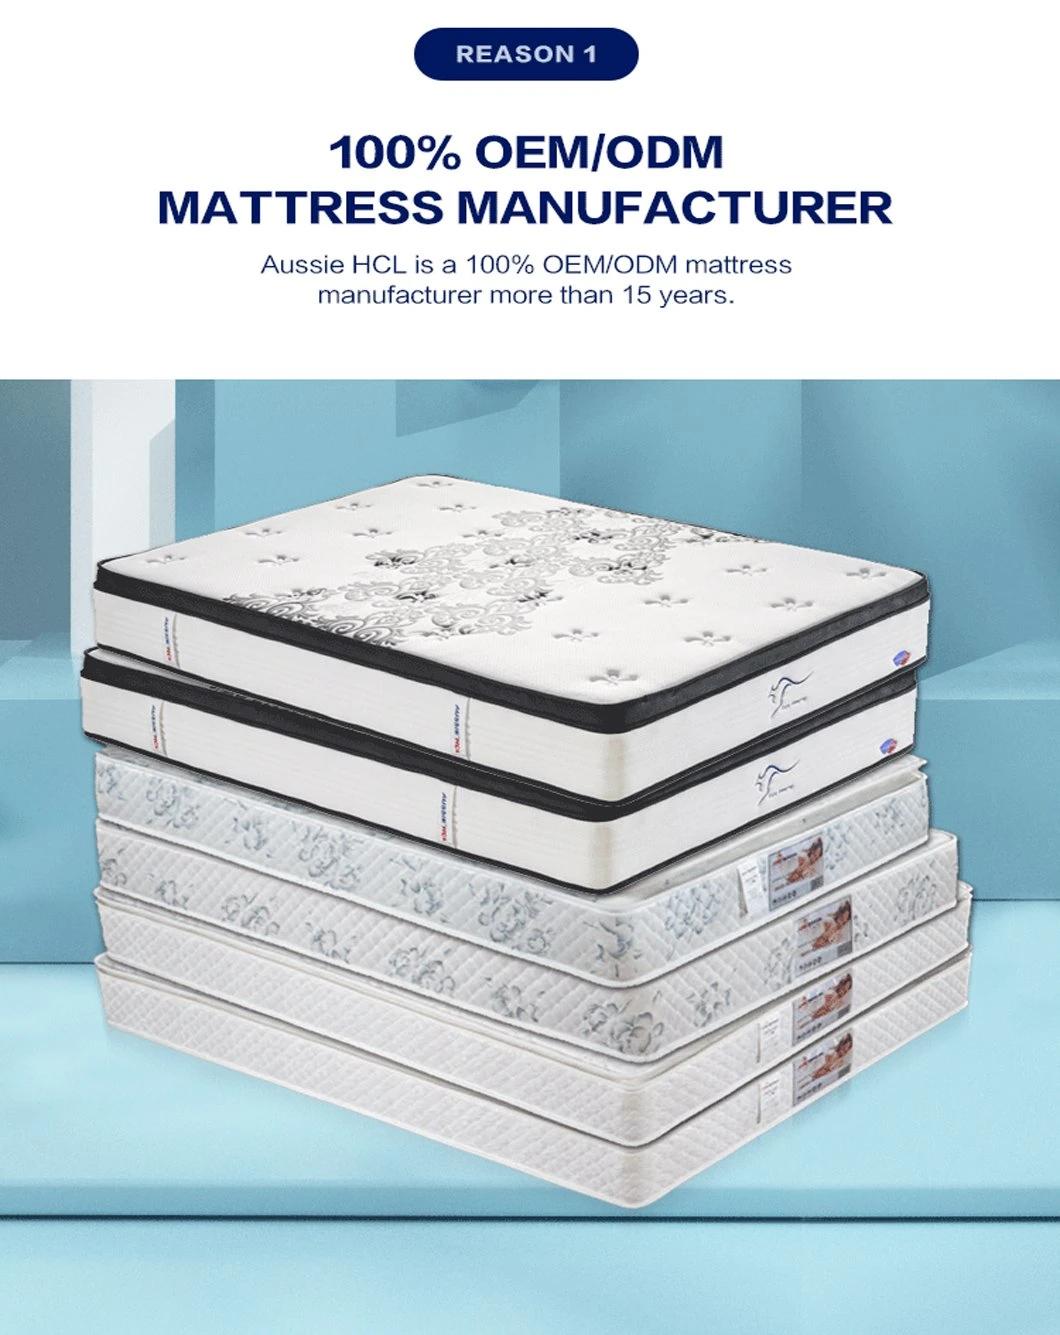 Quality Sleeping Well in a Box The Best Factory Full Inch Mattresses King Double Gel Memory Foam Spring Mattress